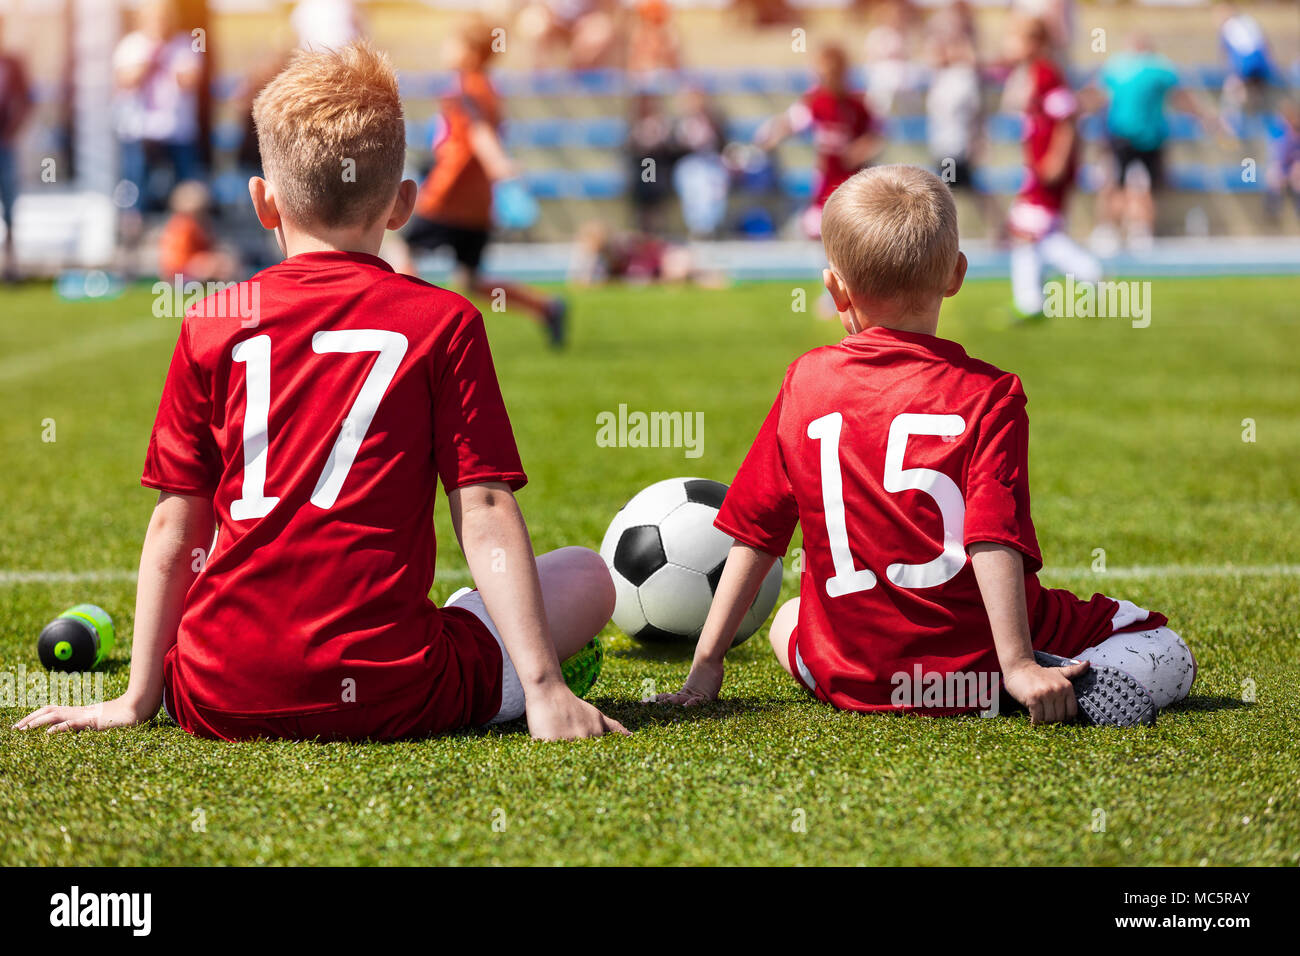 Coaching Kids Soccer. Young Boys Sitting on Football Field and Watching Tournament Game. Football Match for Children Stock Photo